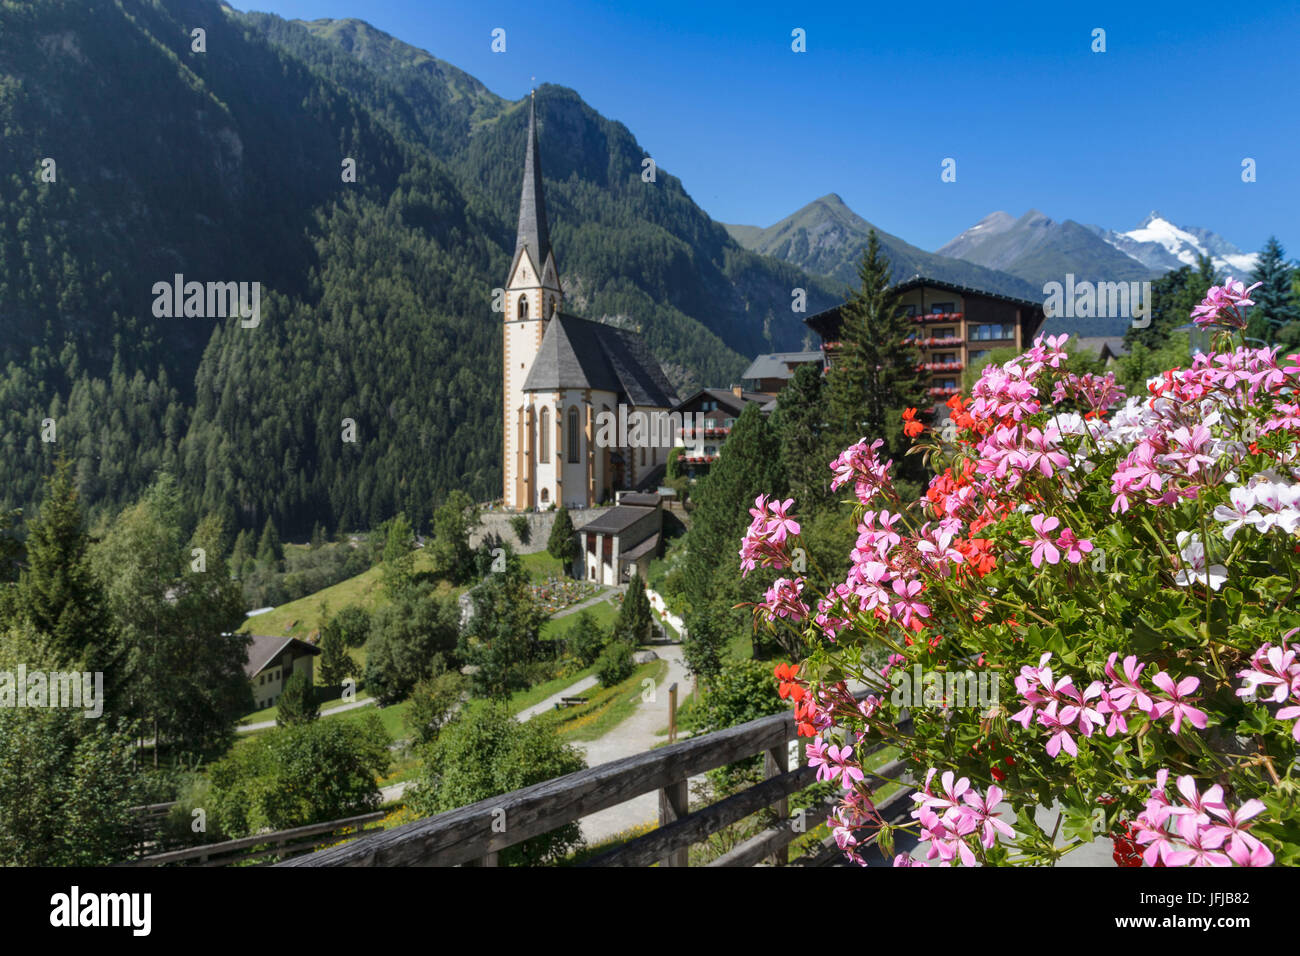 Europe, Austria, Carinthia, district of Spittal an der Drau, Heiligenblut with St Vincent Church and Grossglockner mountain on background Stock Photo